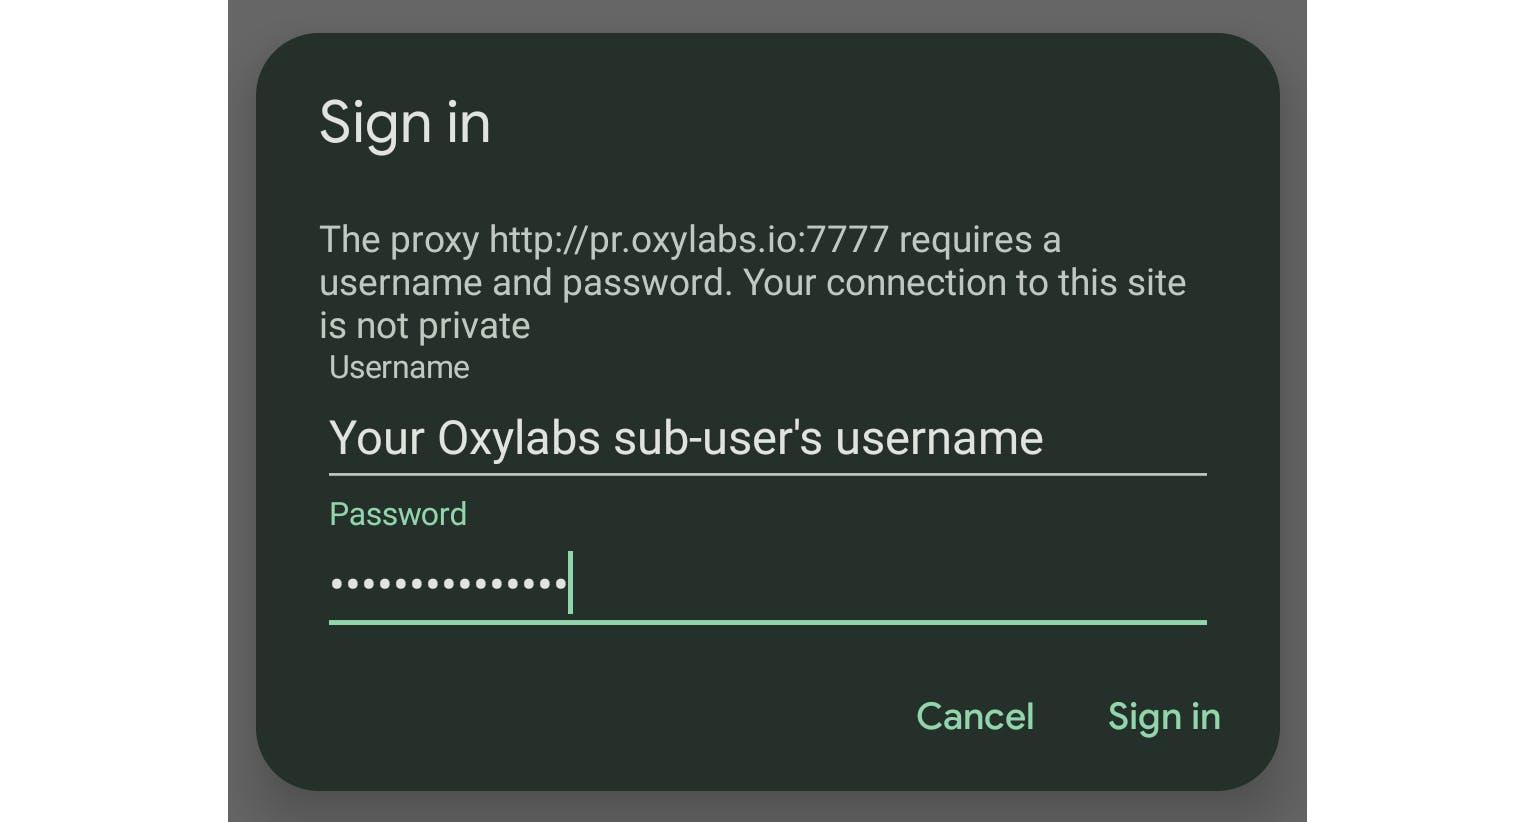 Entering the Oxylabs sub-user’s credentials